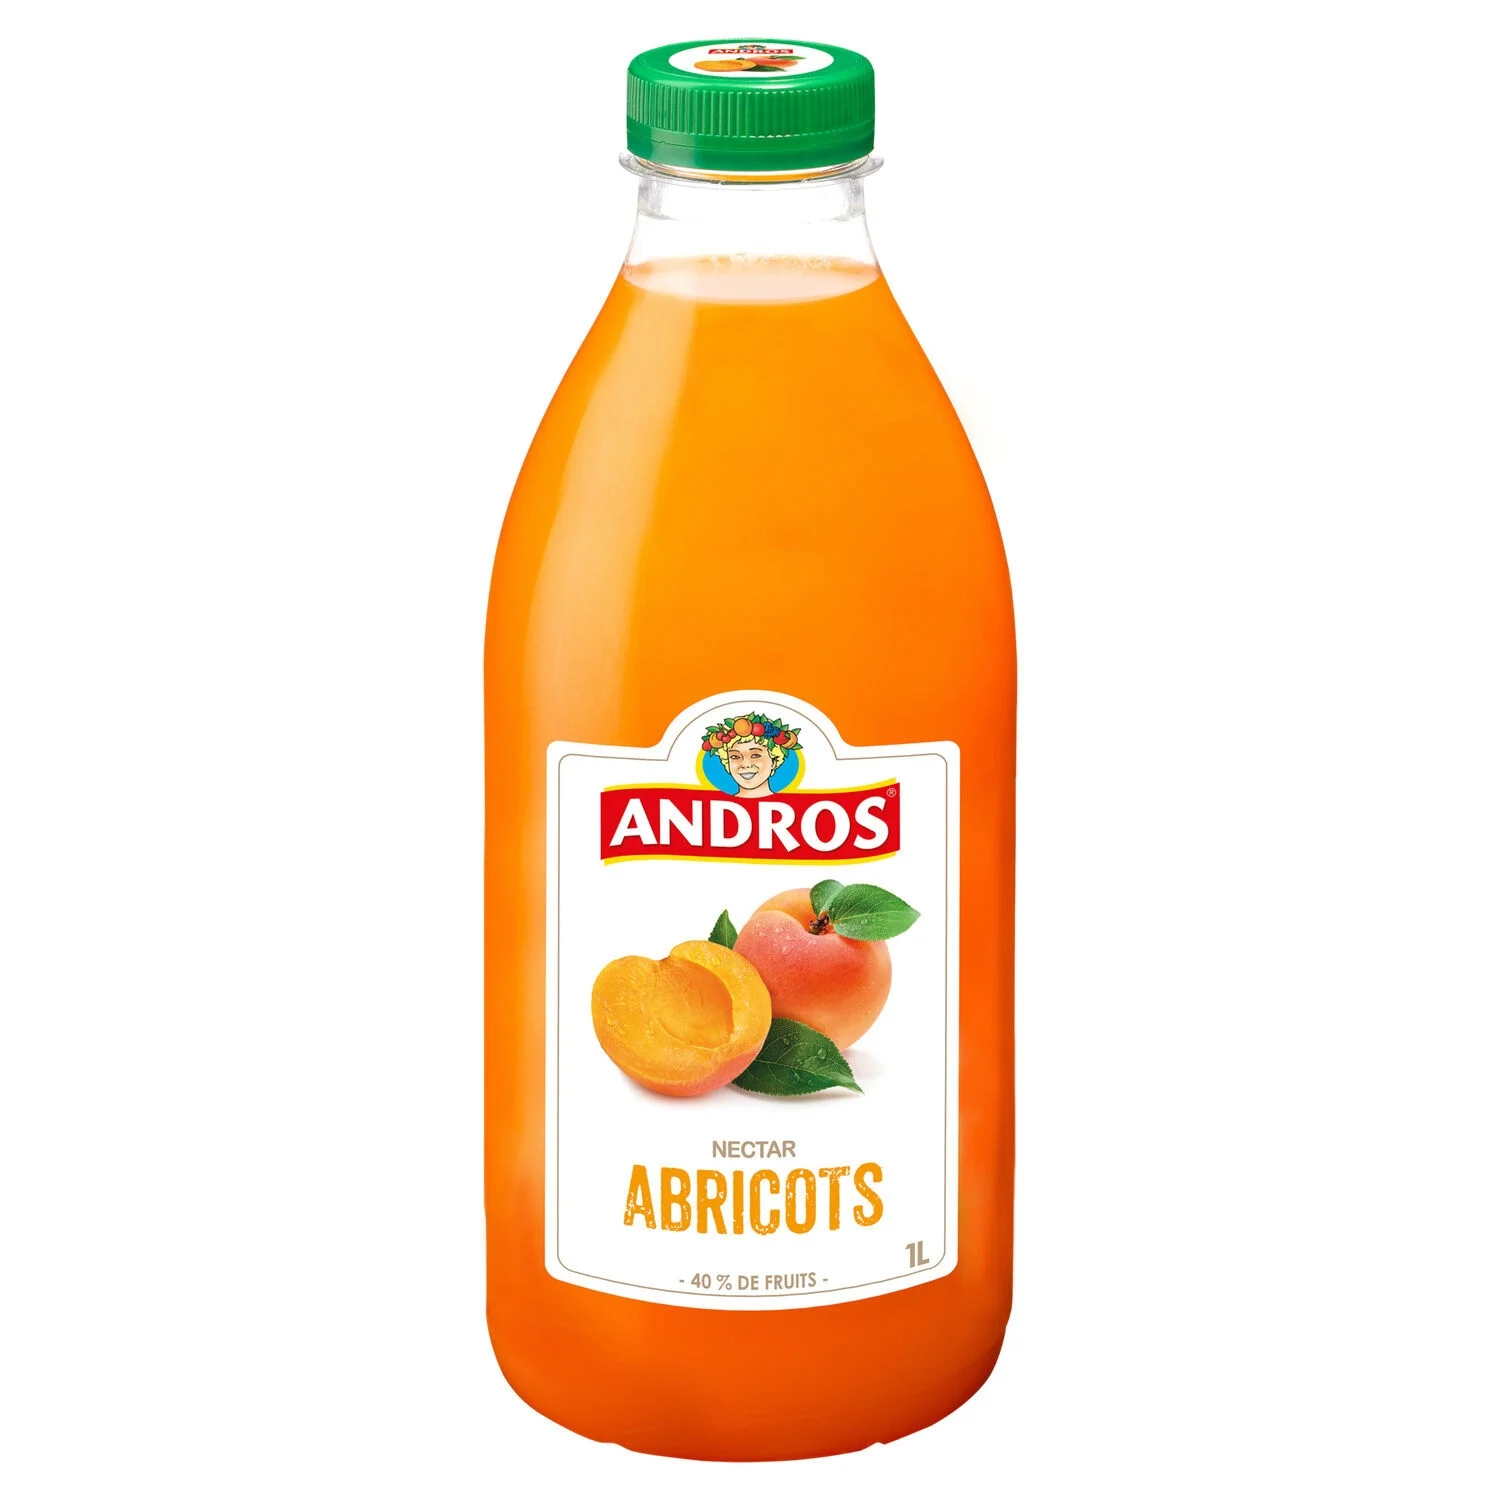 1l Nectar Abricot Andros